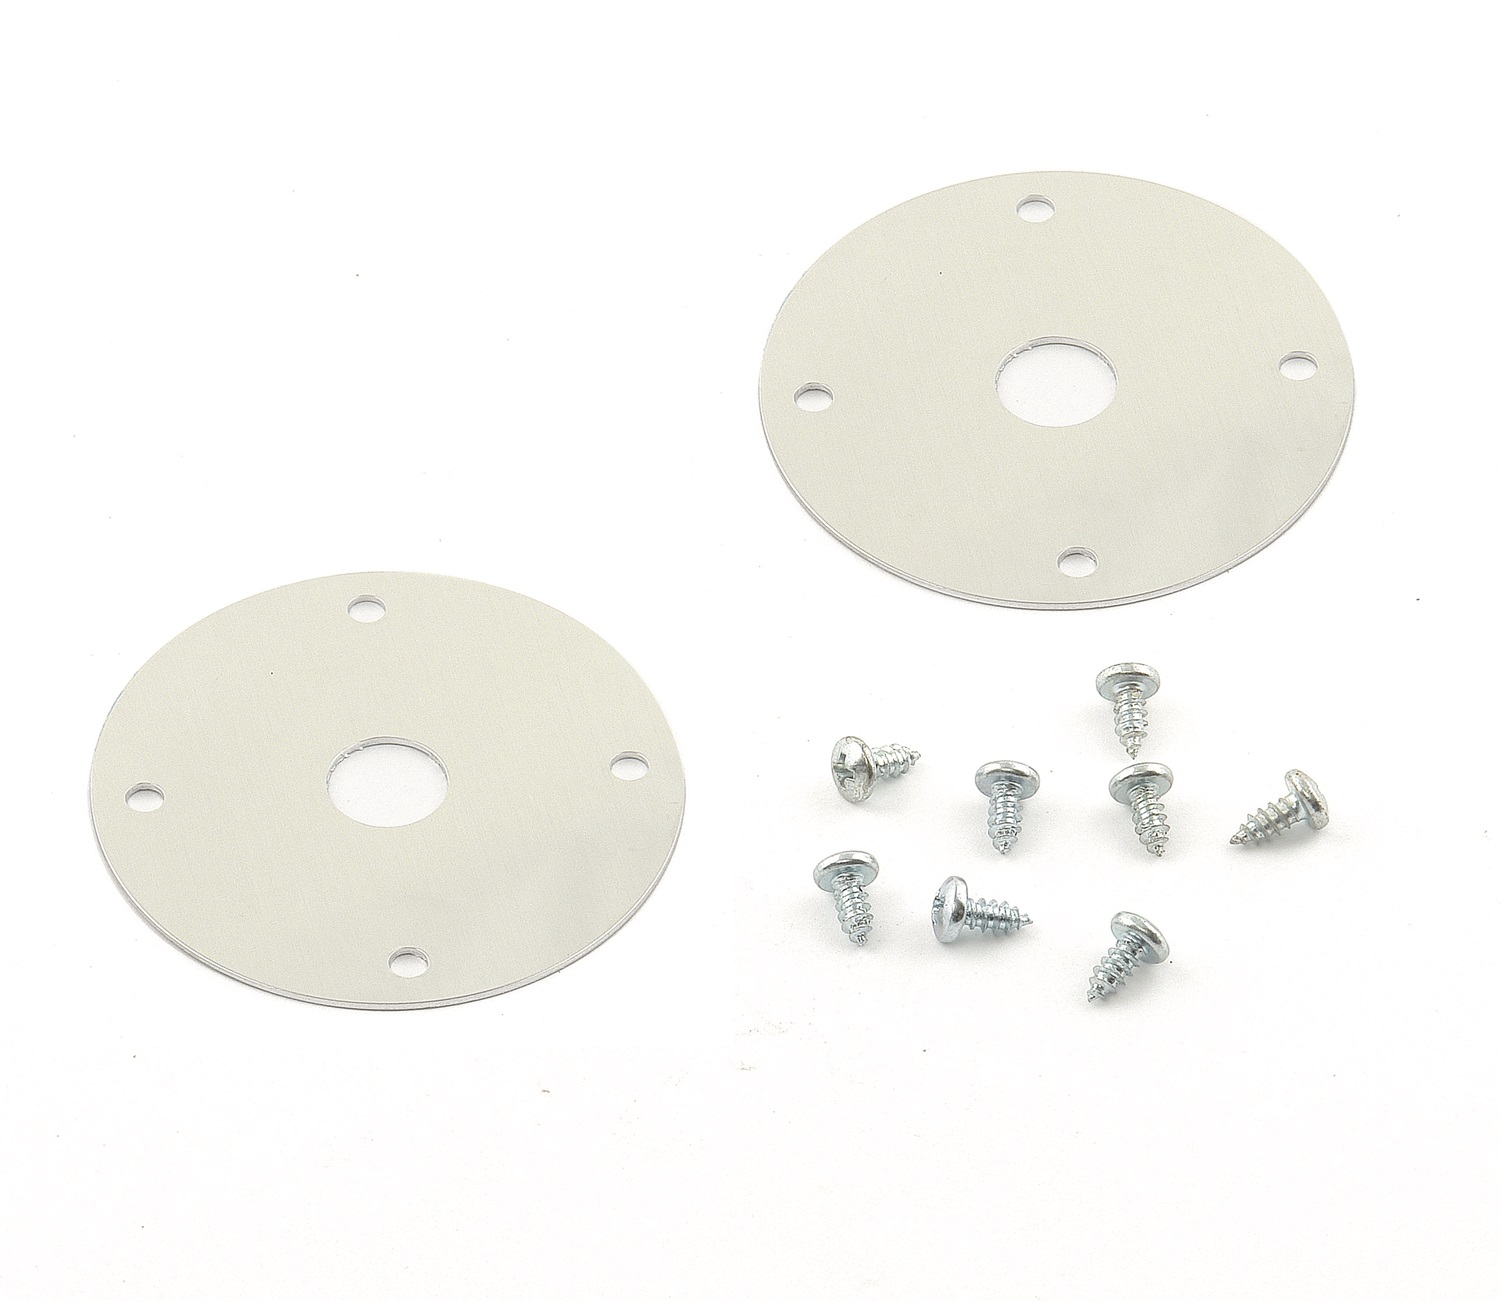 Mr. Gasket Mr. Gasket 1618 Replacement Scuff Plates